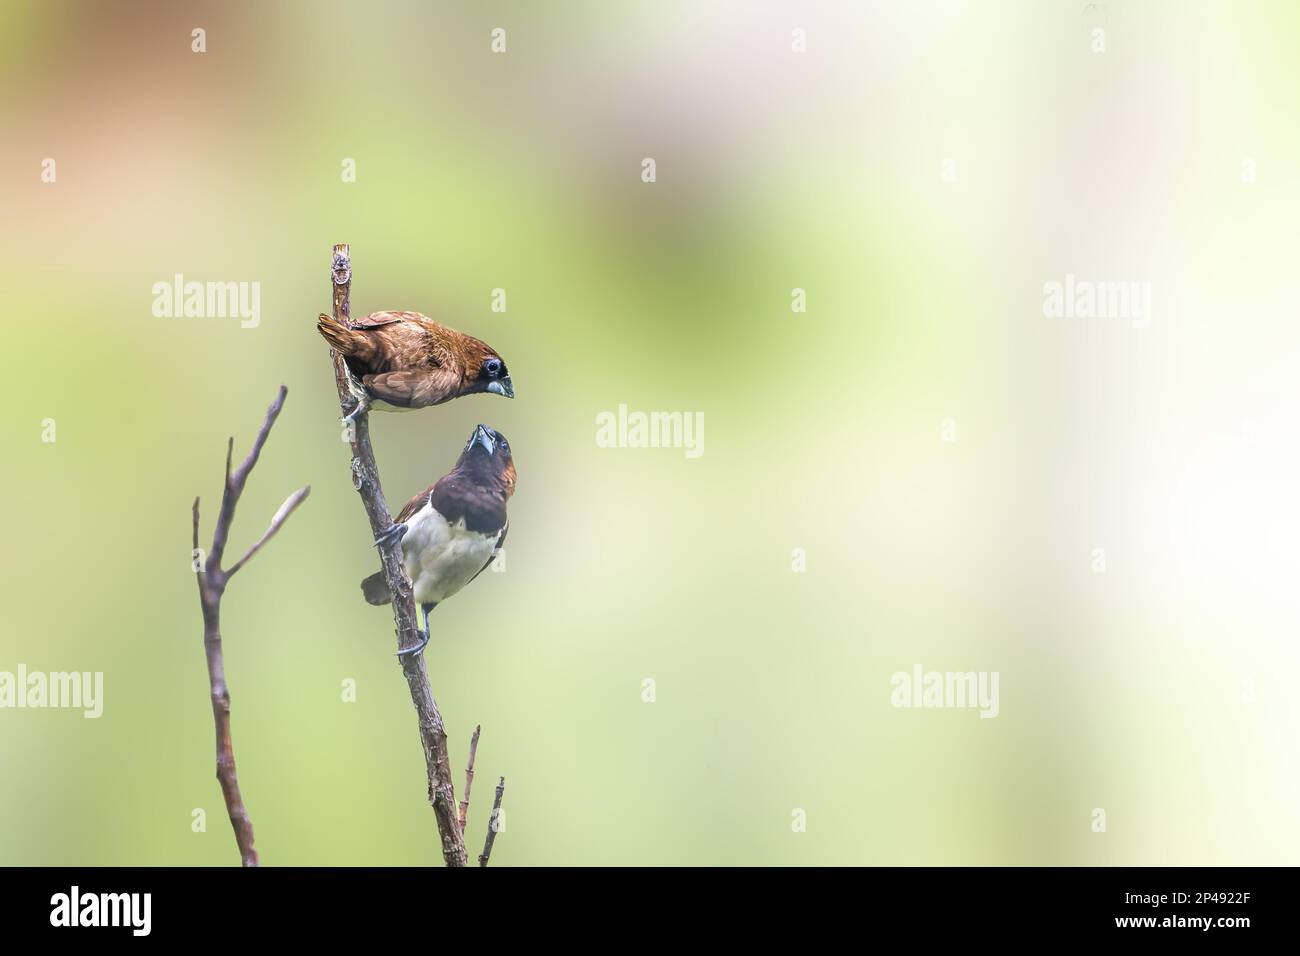 Two birds of the type Estrildidae sparrow or estrildid finches perched on a branch on a sunny morning, background in the form of blurred green leaves Stock Photo